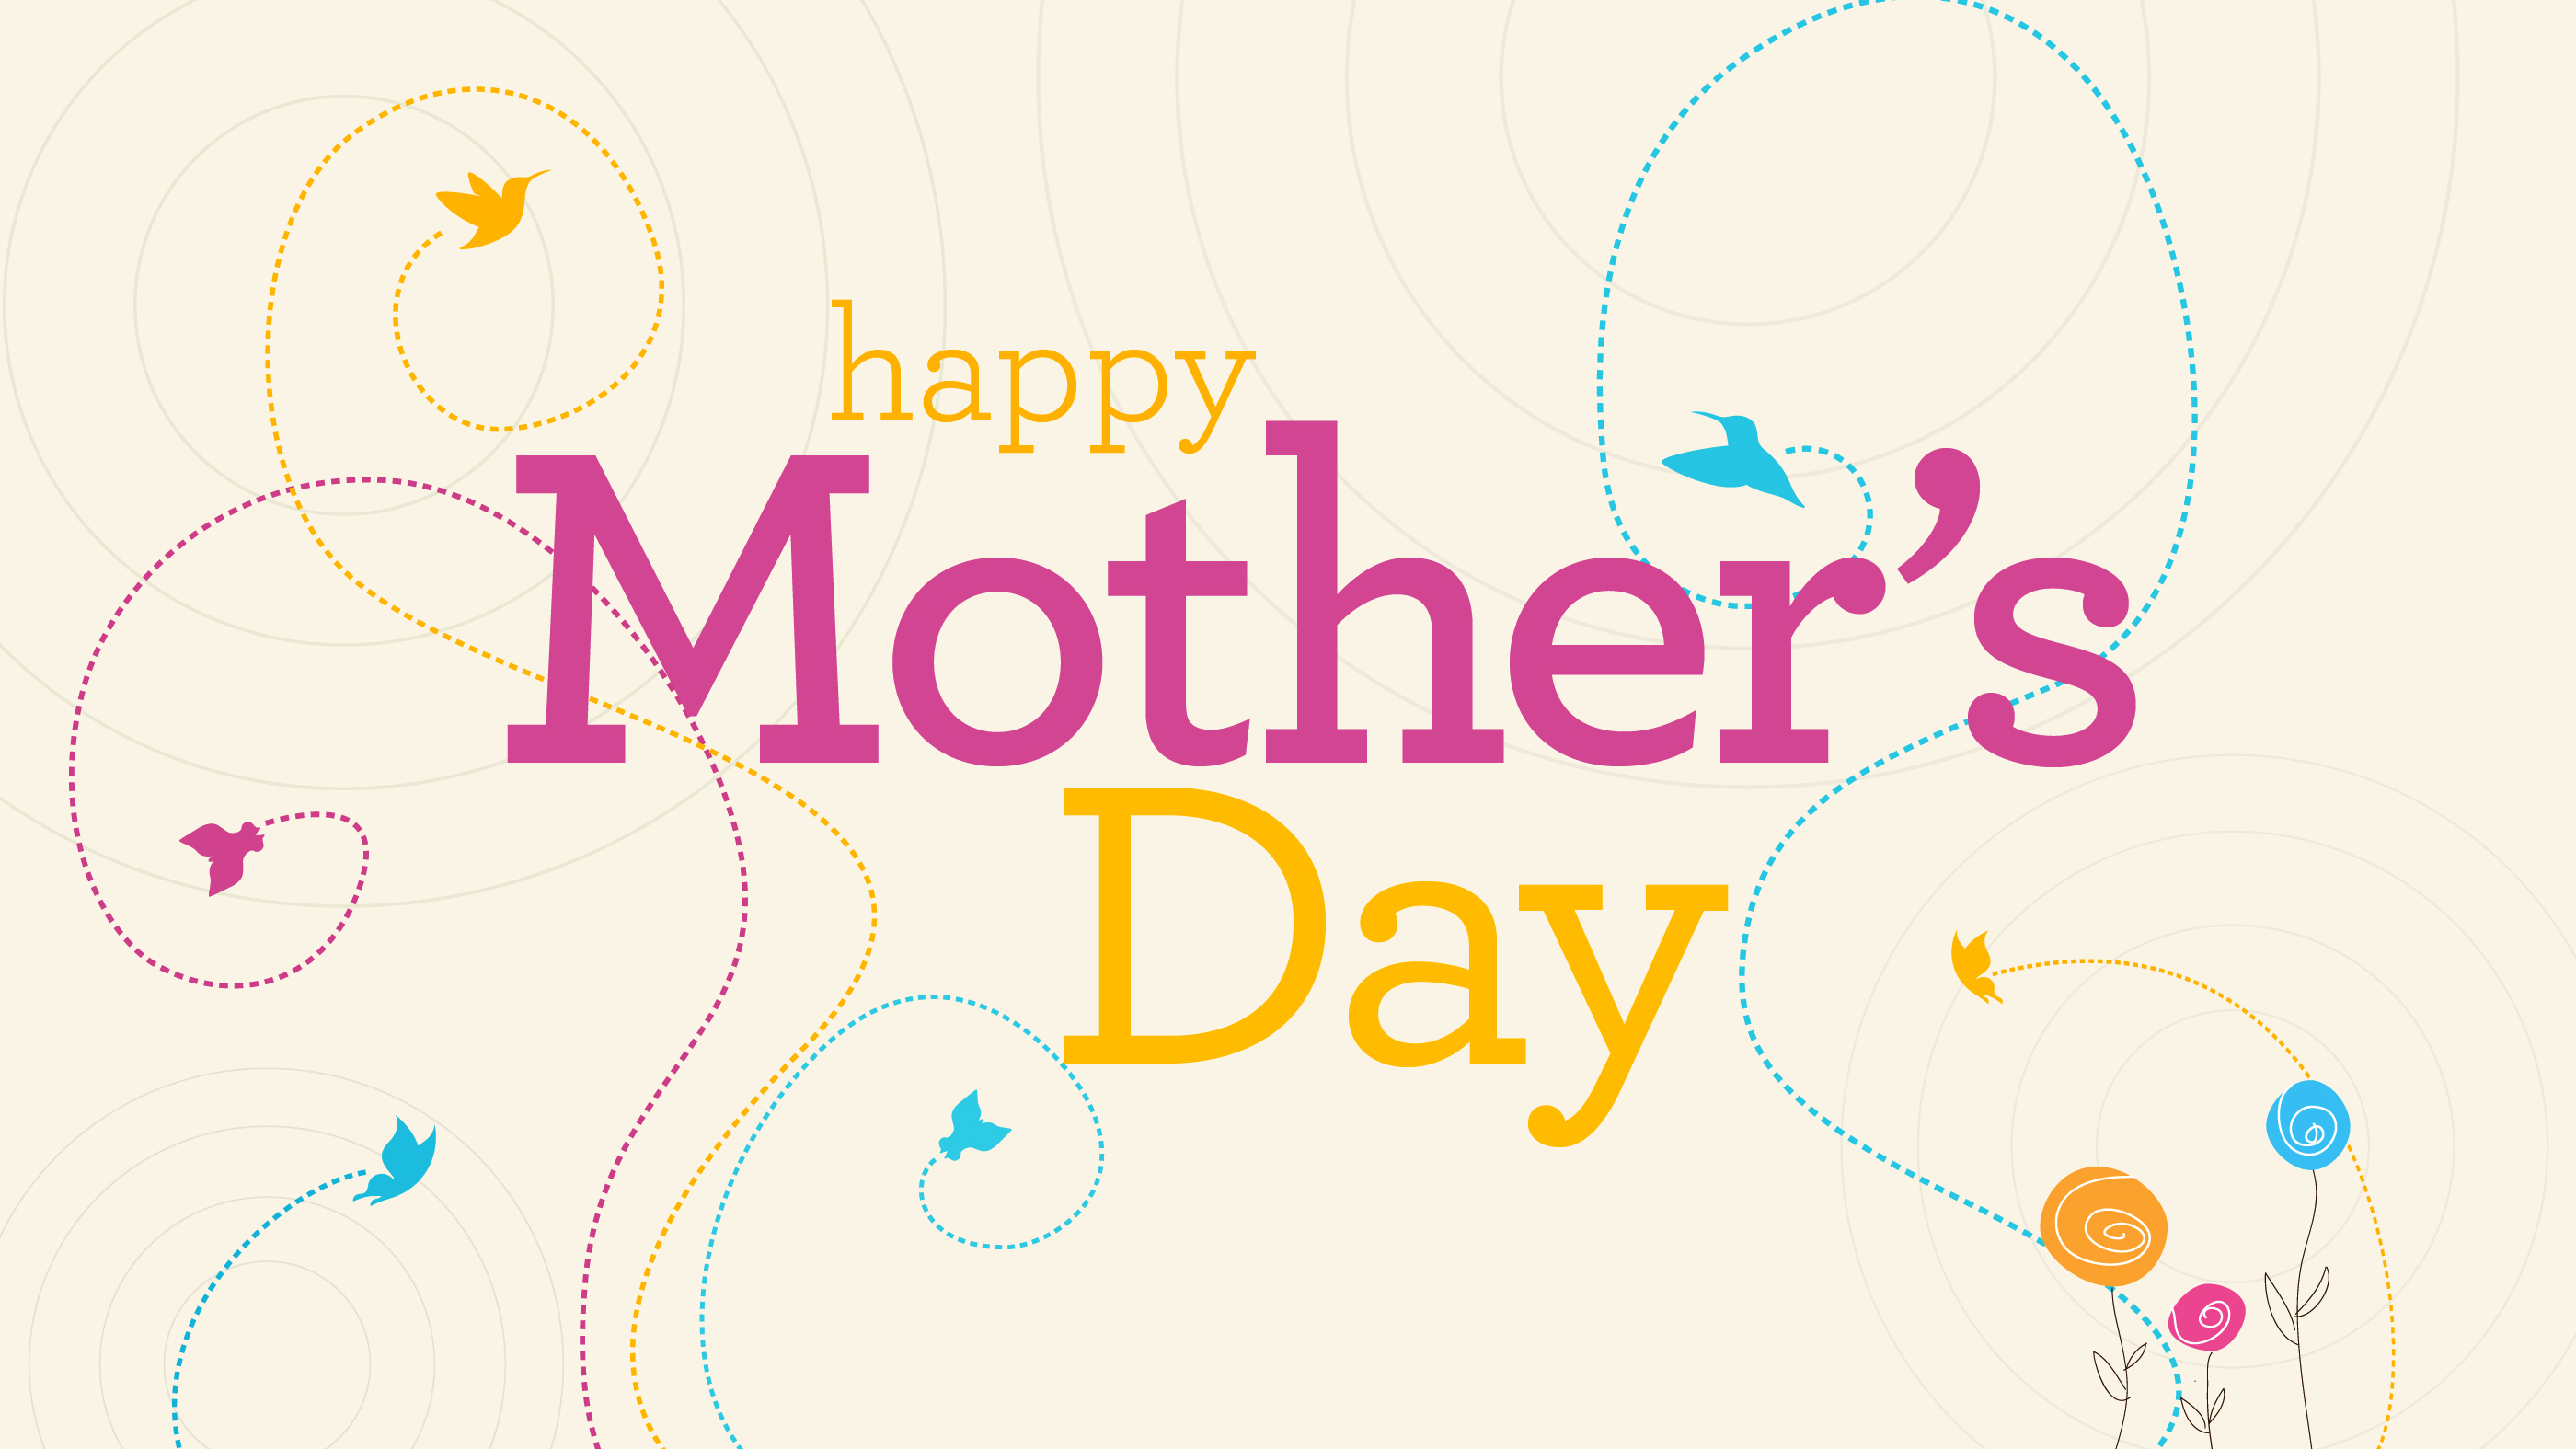 Mothers Day Wallpaper Hd Dowload